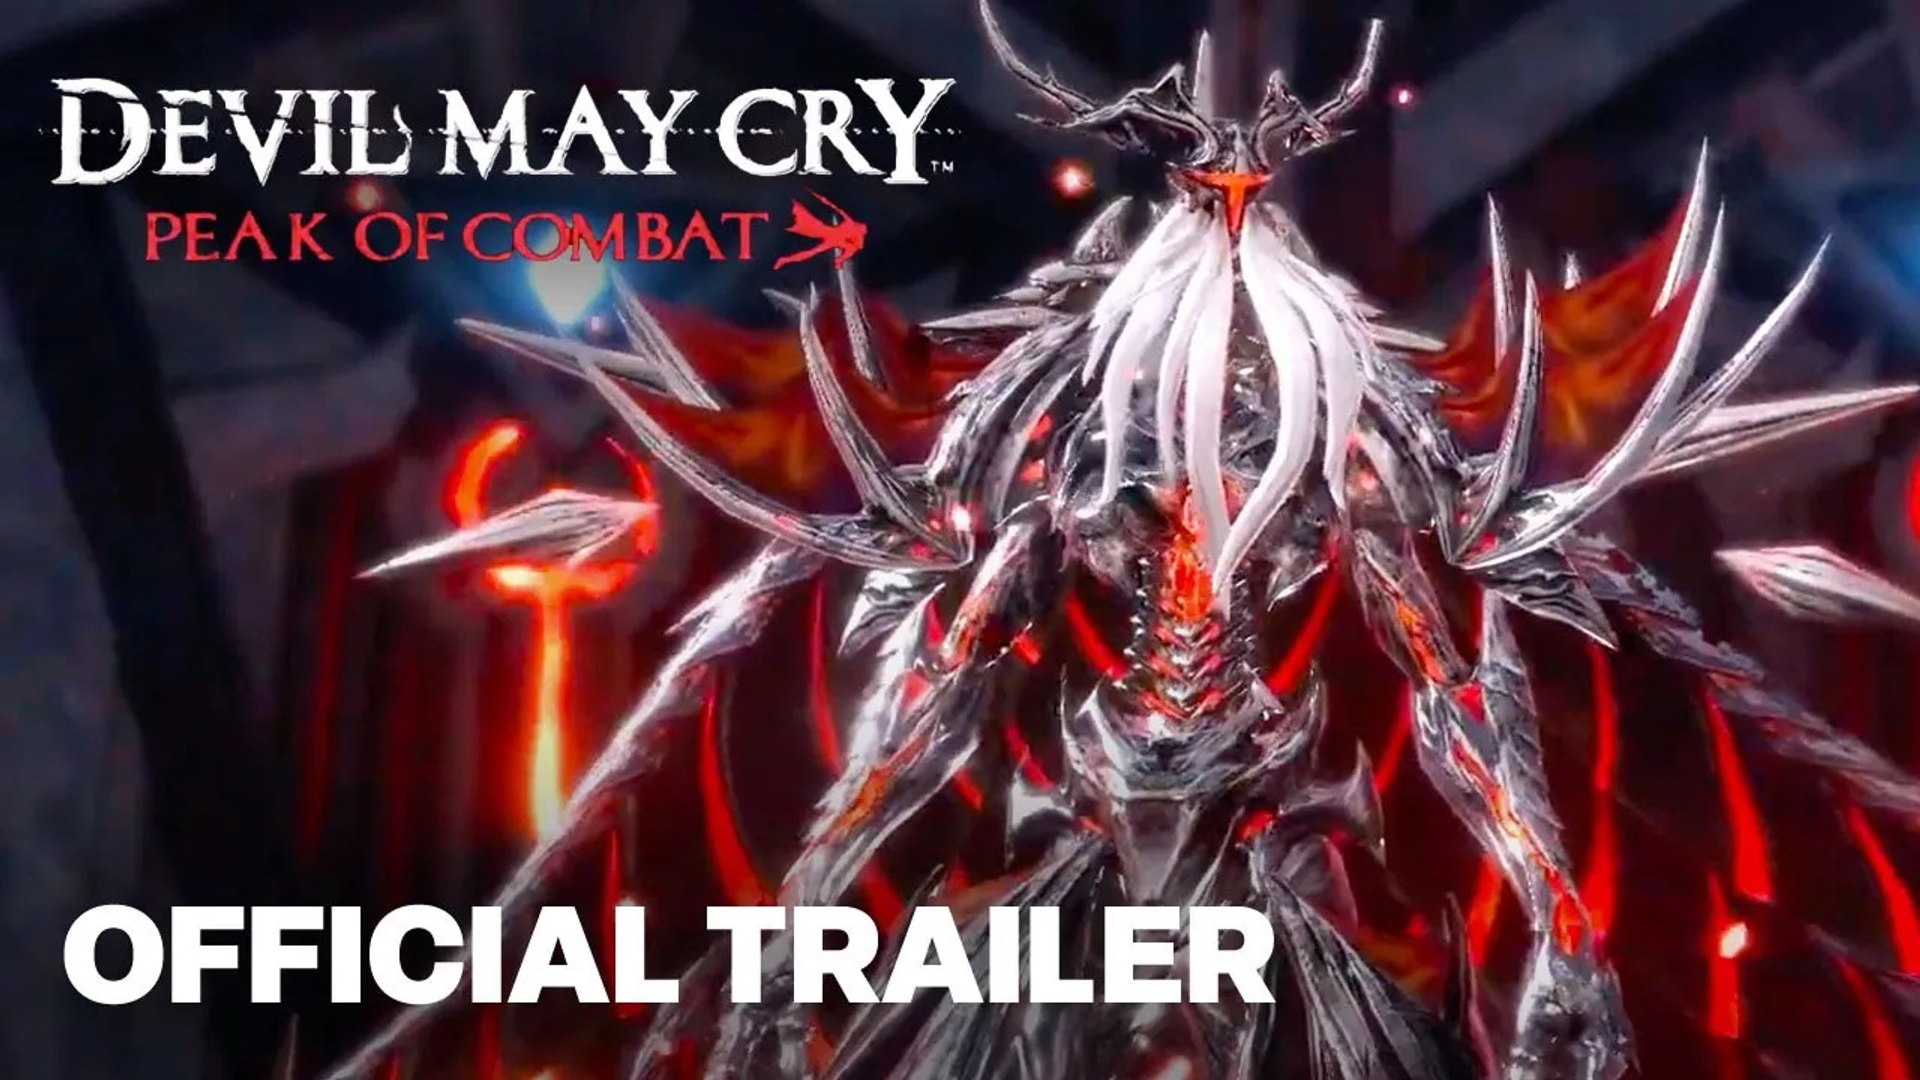 Devil May Cry Peak Of Combat The Rise of the King of Demons Trailer - video  Dailymotion